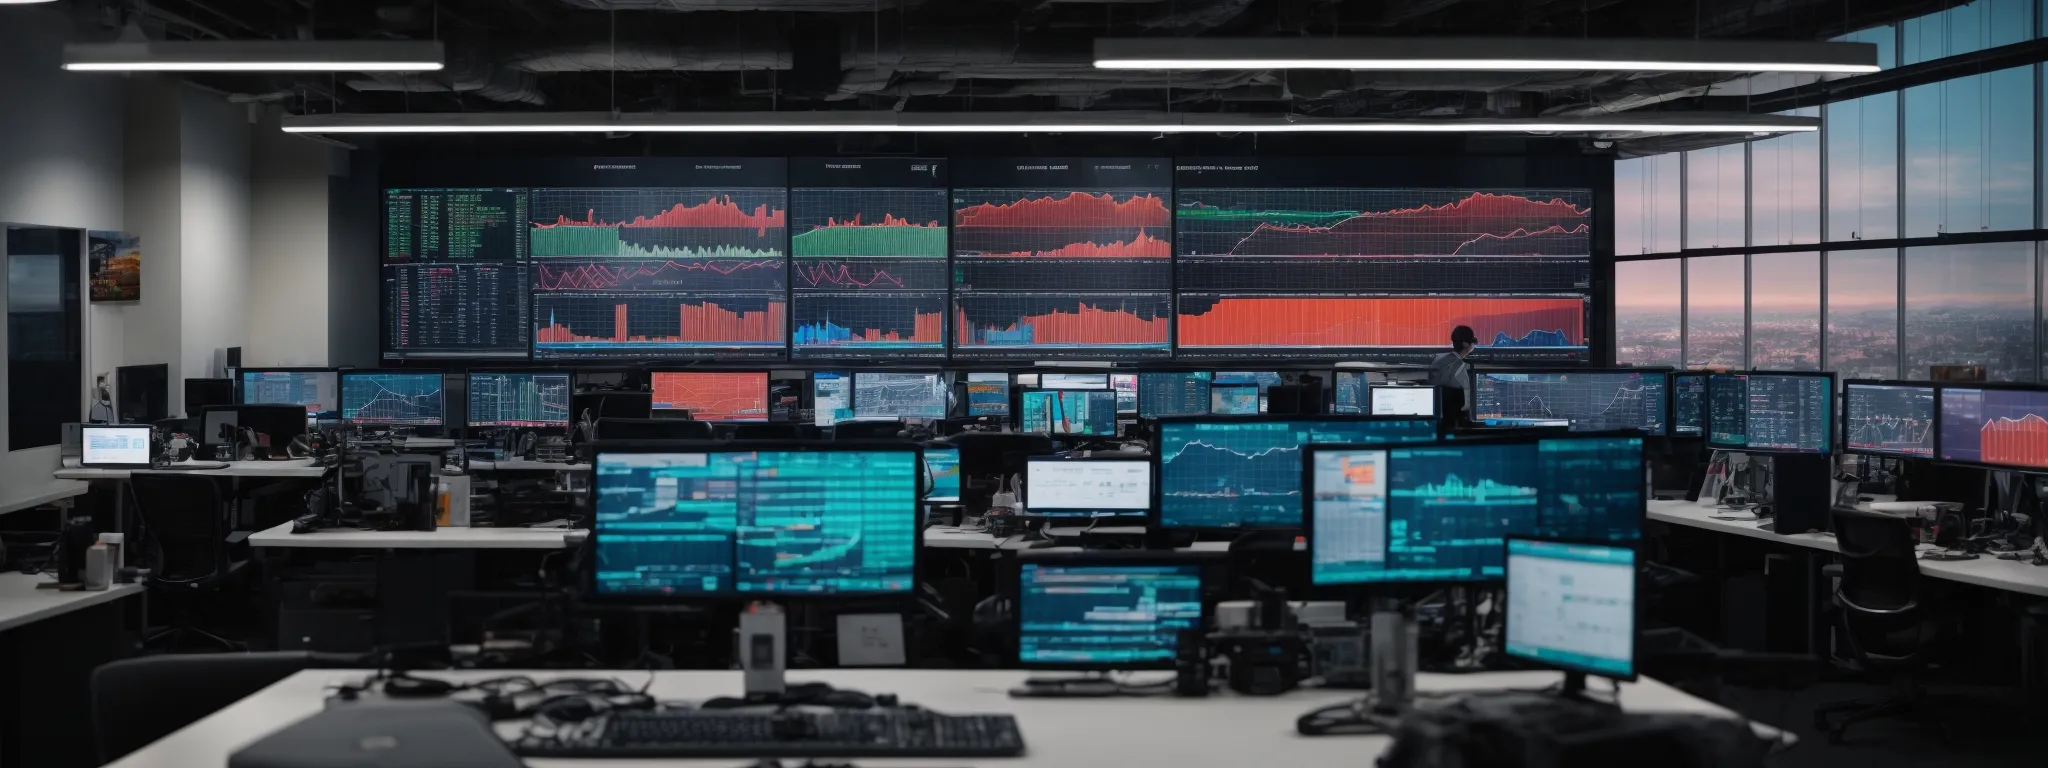 a panoramic view of an office with multiple screens displaying colorful graphs and analytics dashboards.